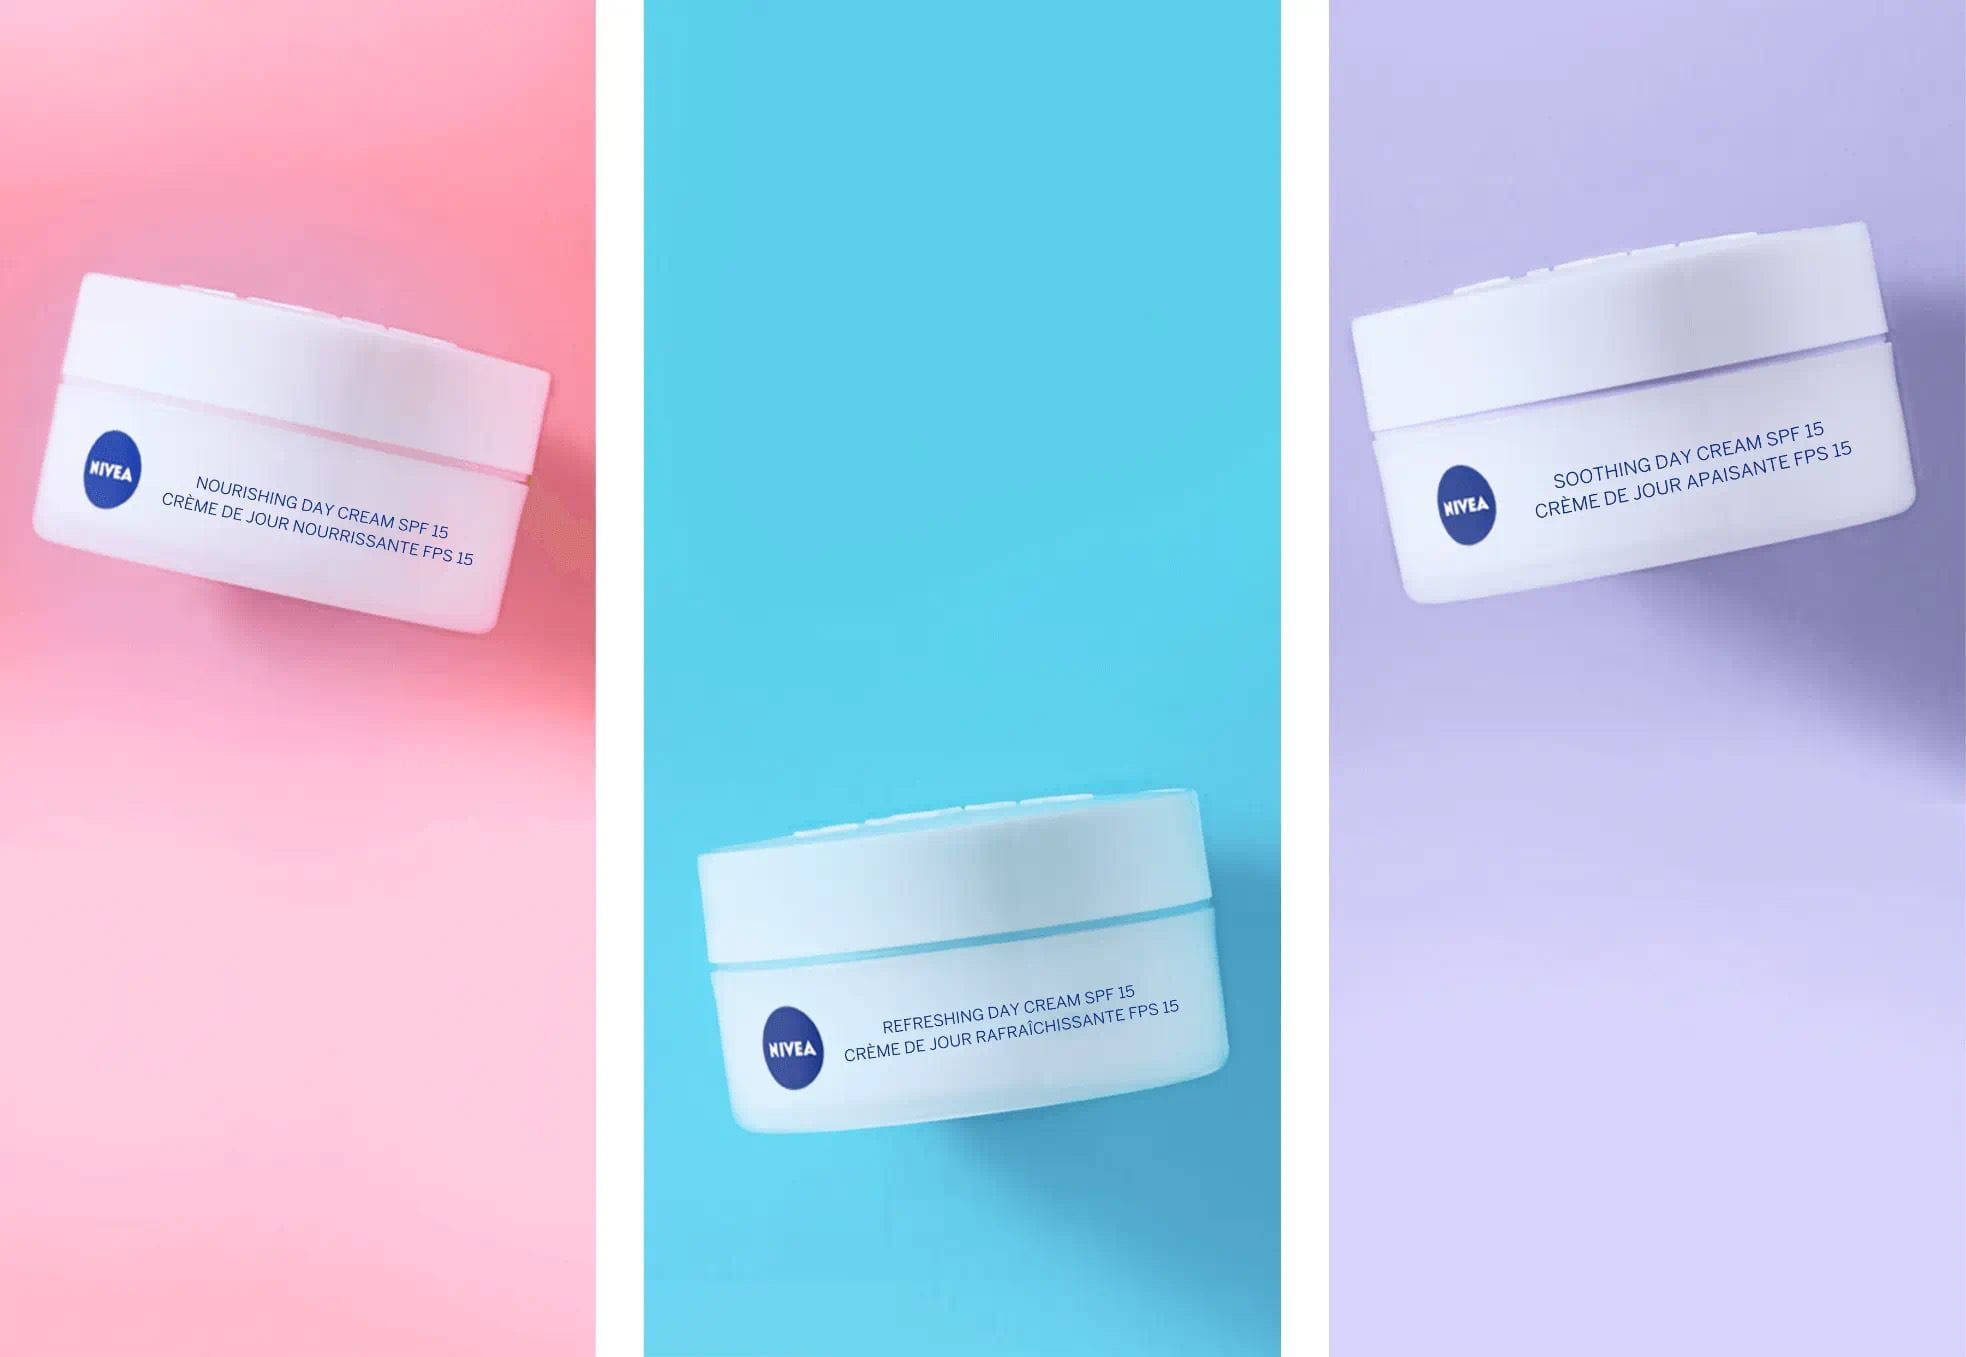 NIVEA Face Essentials for every skin